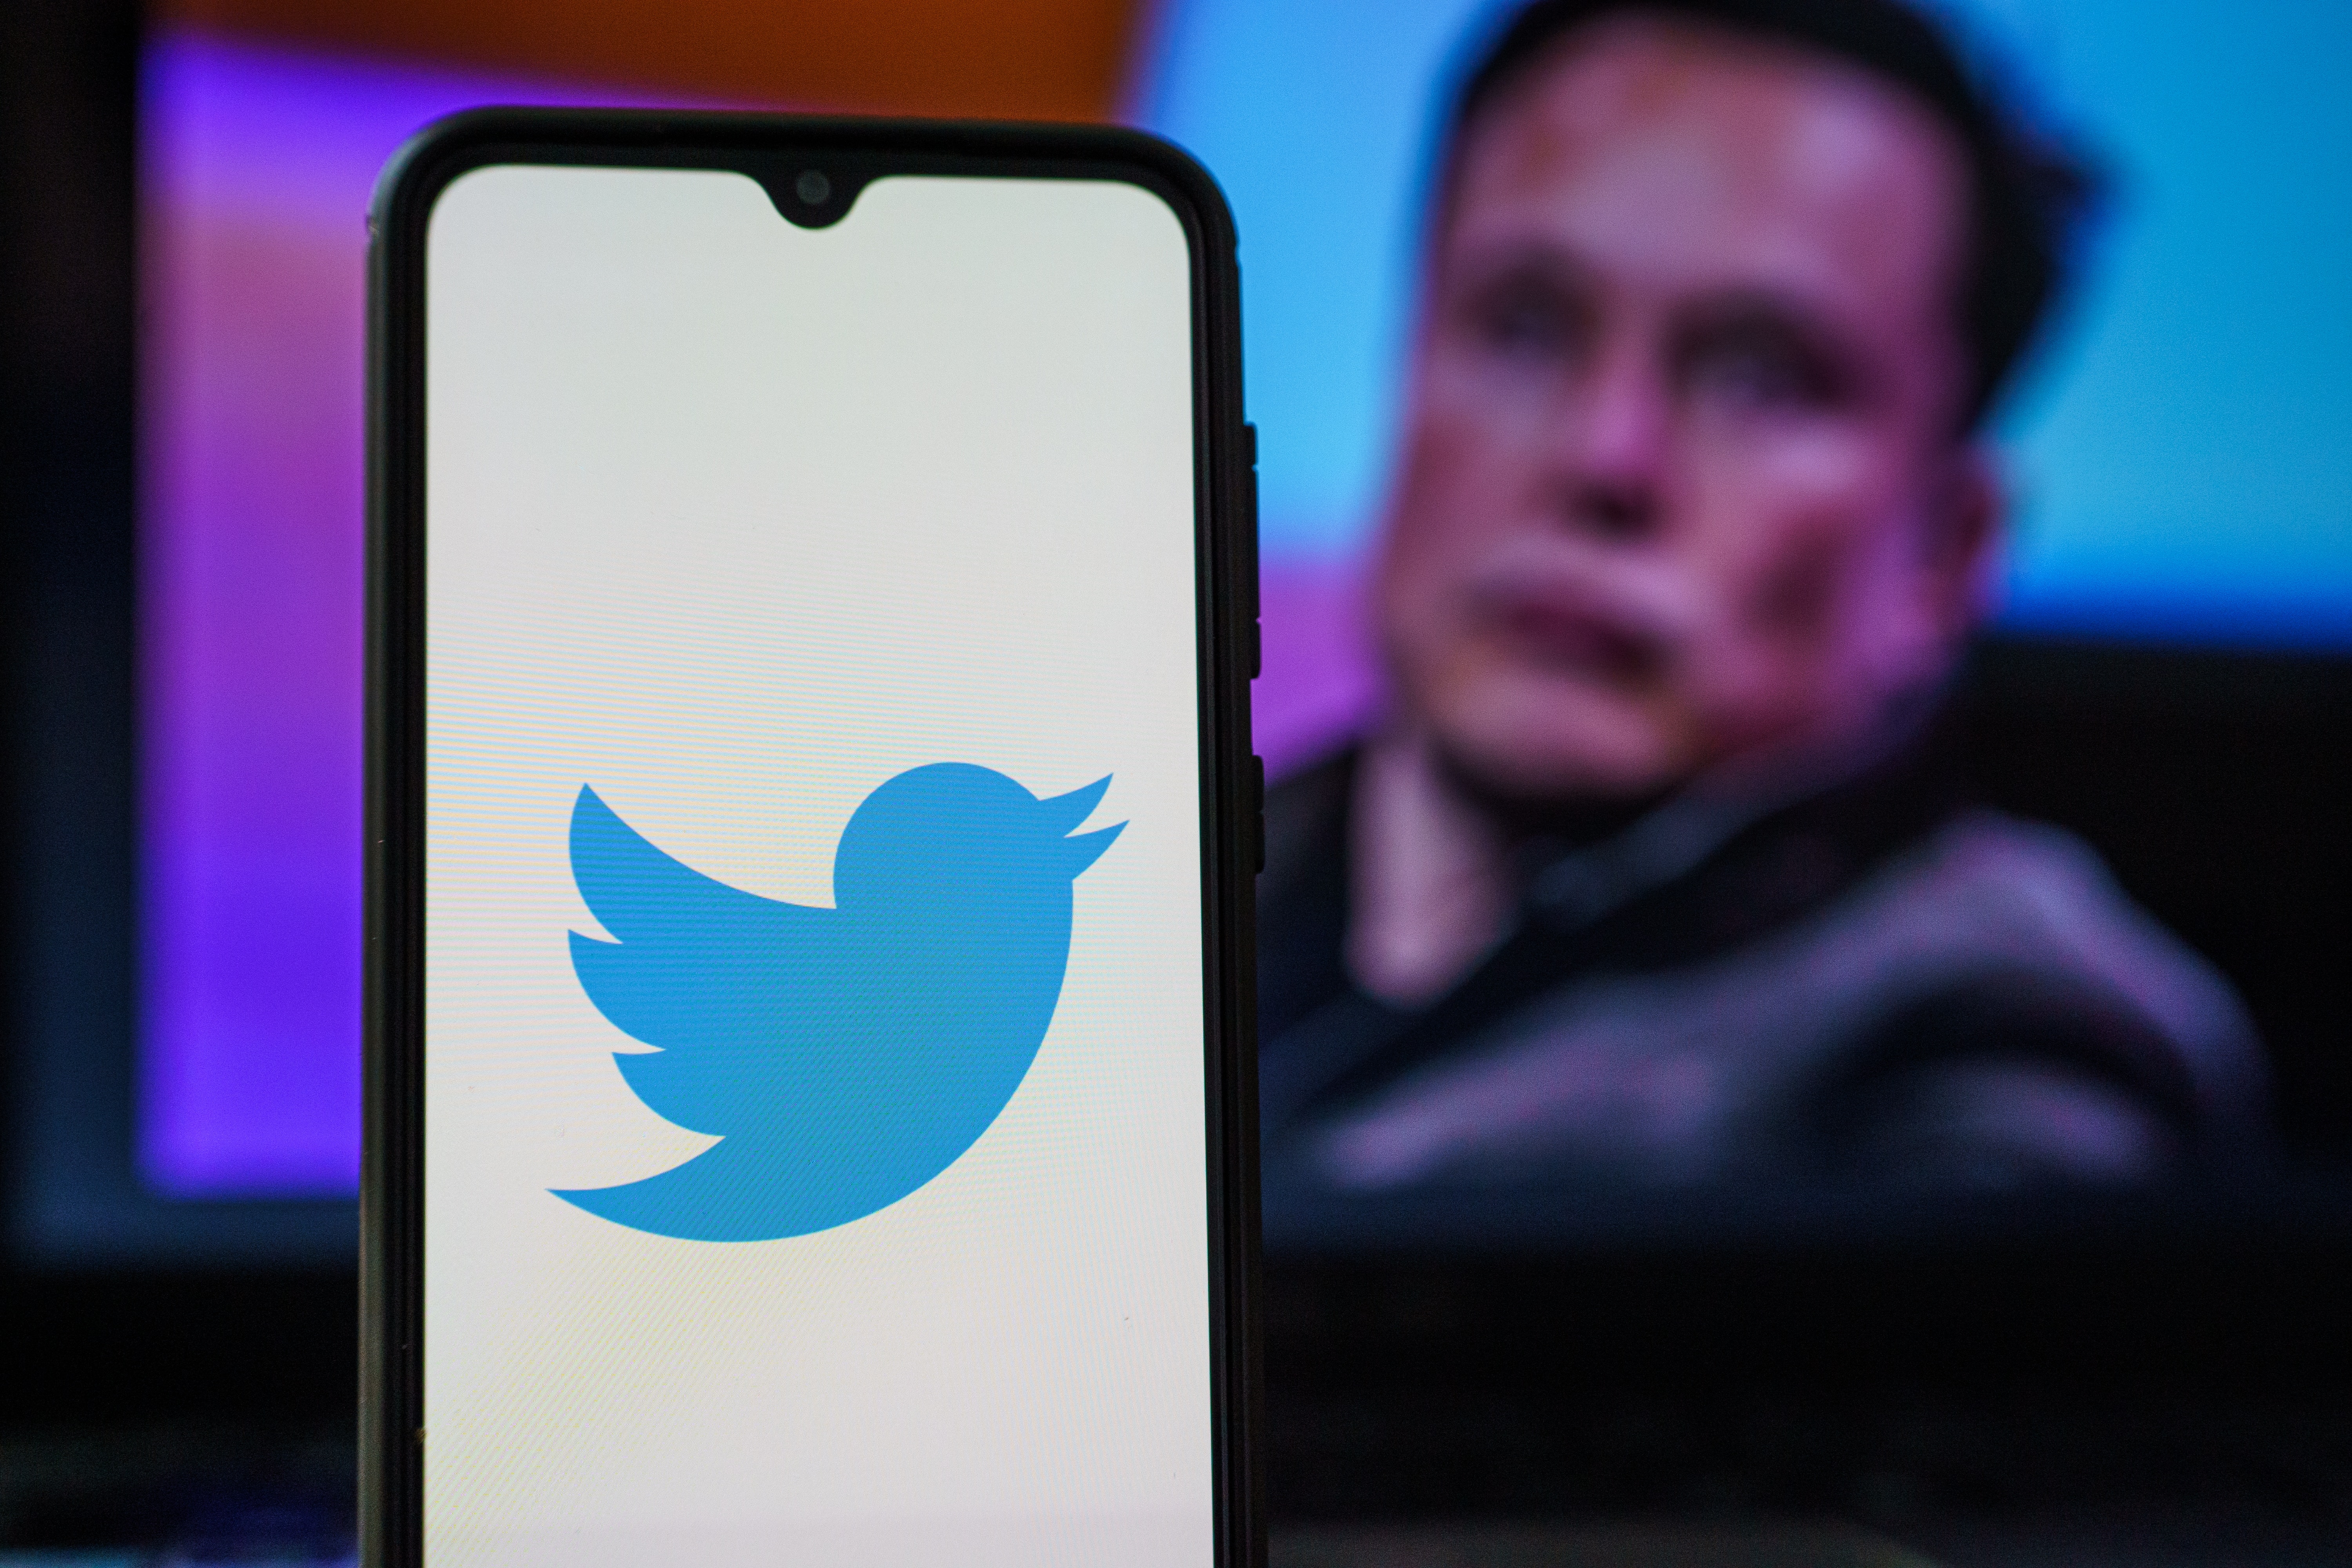 Elon Musk Vs Twitter In Court: Analyst Says Brace Yourself For A 'Game Of Thrones' Style Battle